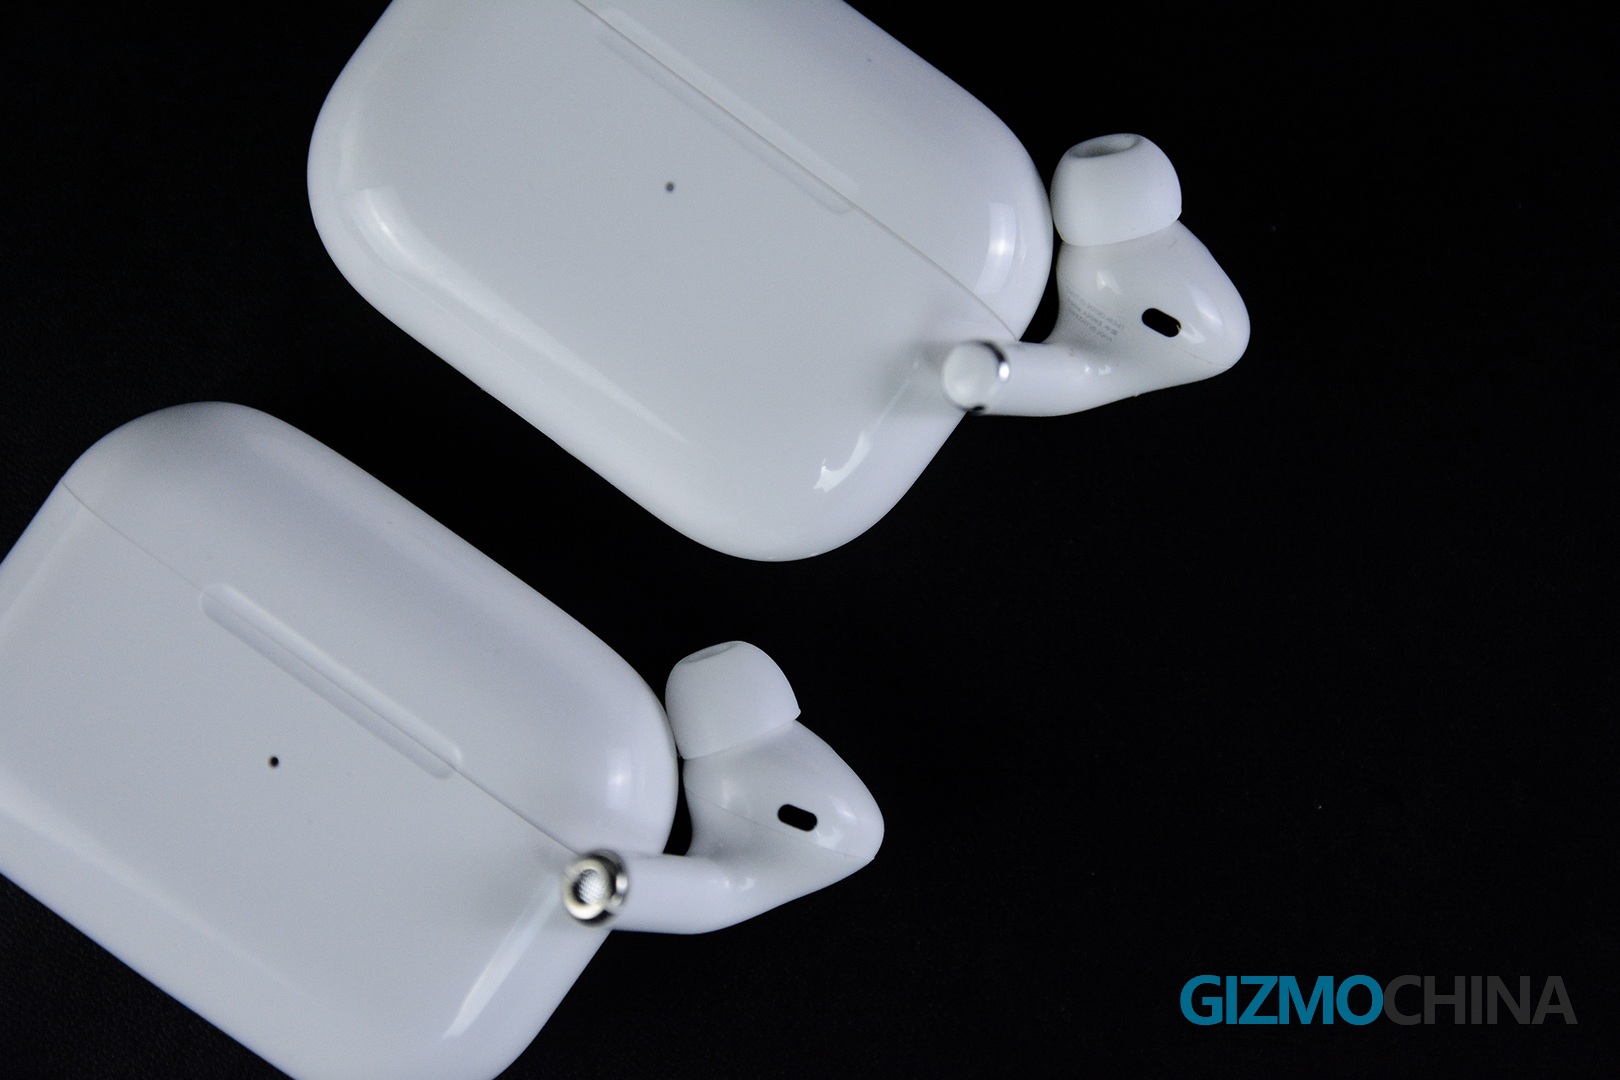 Scans reveal the flimsy, cheap components in fake AirPods